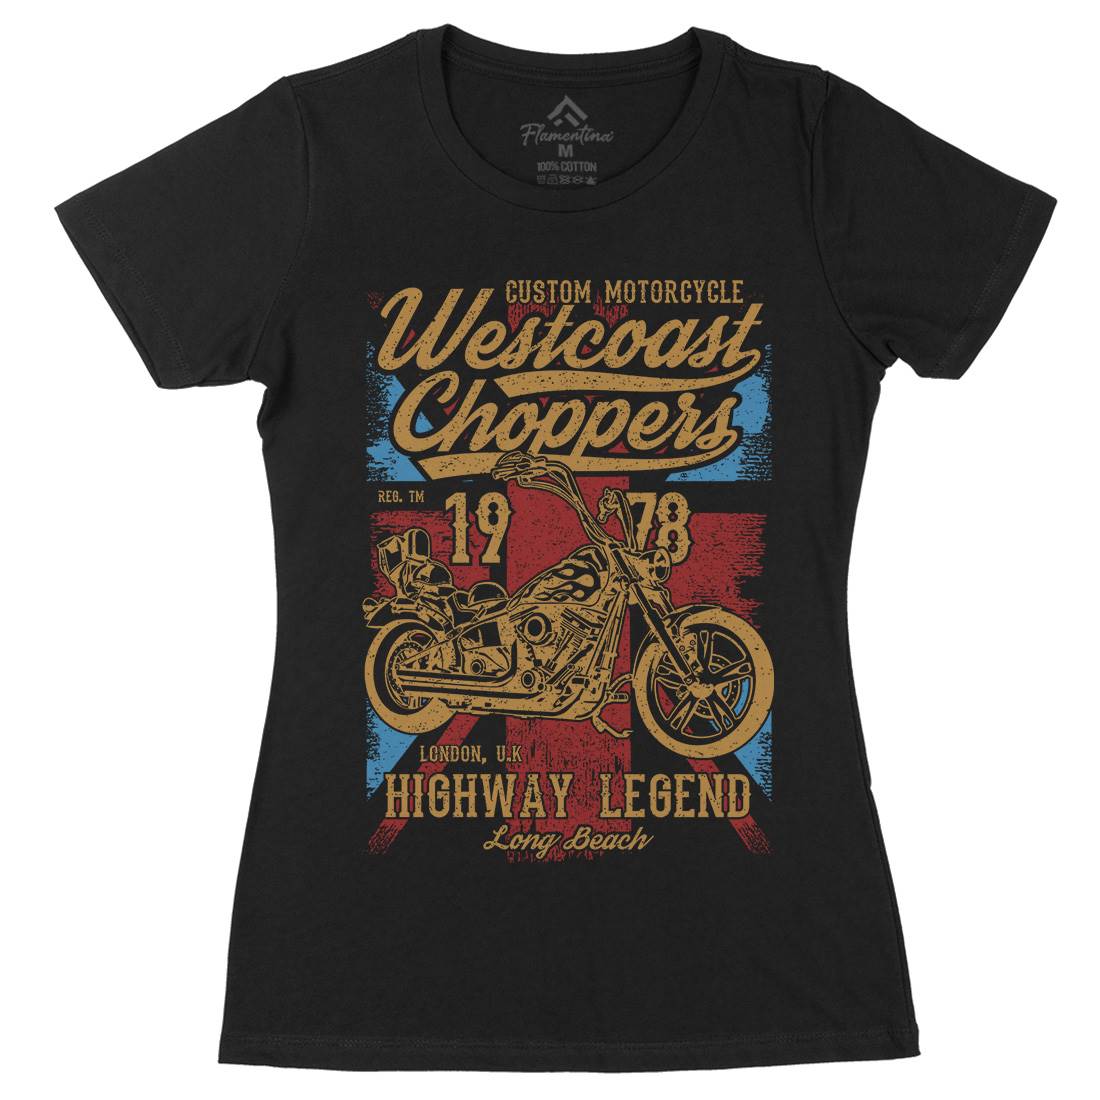 Westcoast Choppers Womens Organic Crew Neck T-Shirt Motorcycles A791